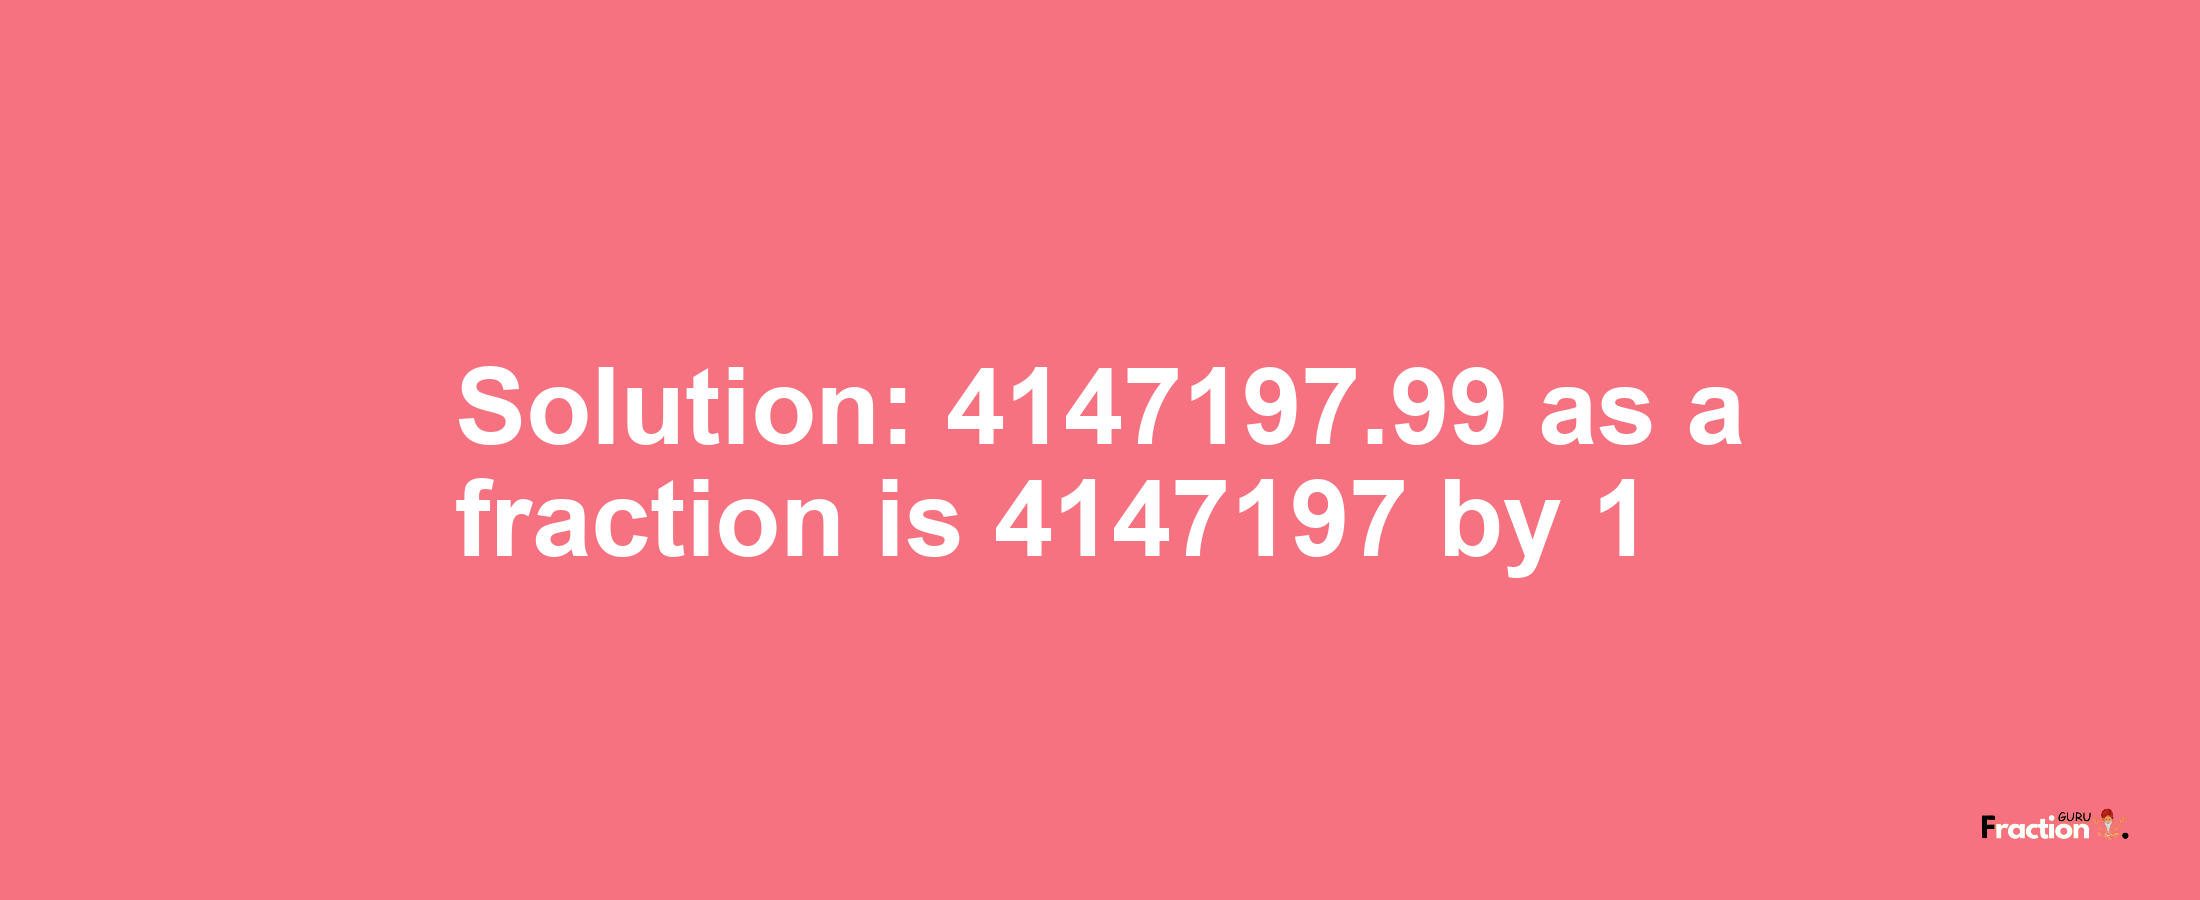 Solution:4147197.99 as a fraction is 4147197/1